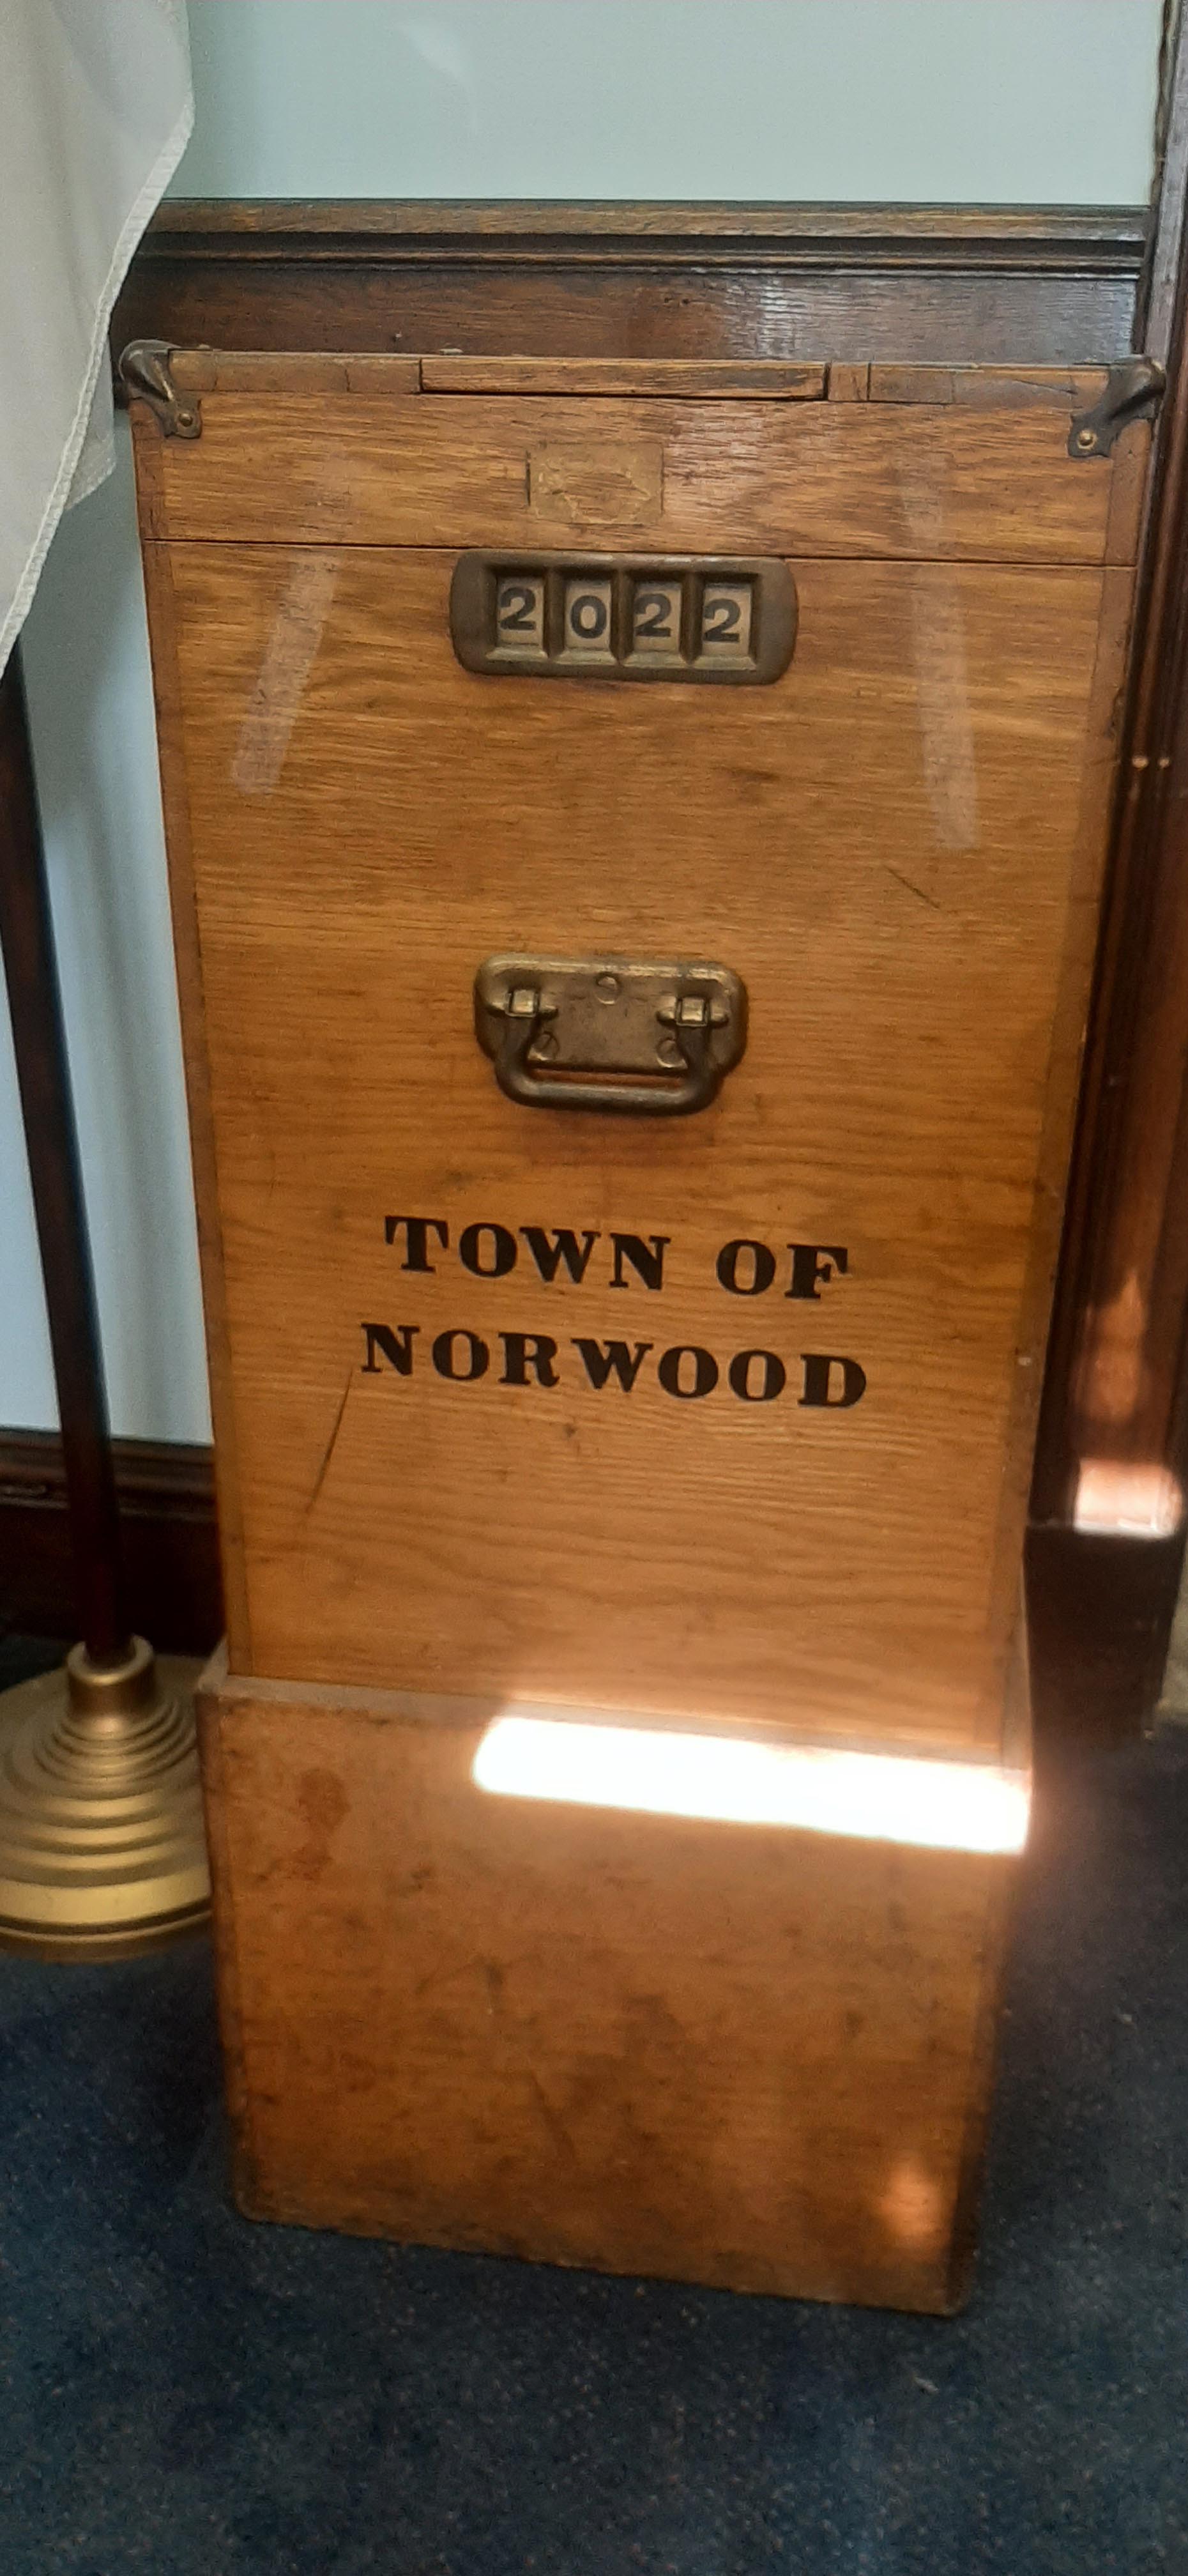 Nomination Papers Now Available For Annual Town Election Norwood Local Town Pages 7292